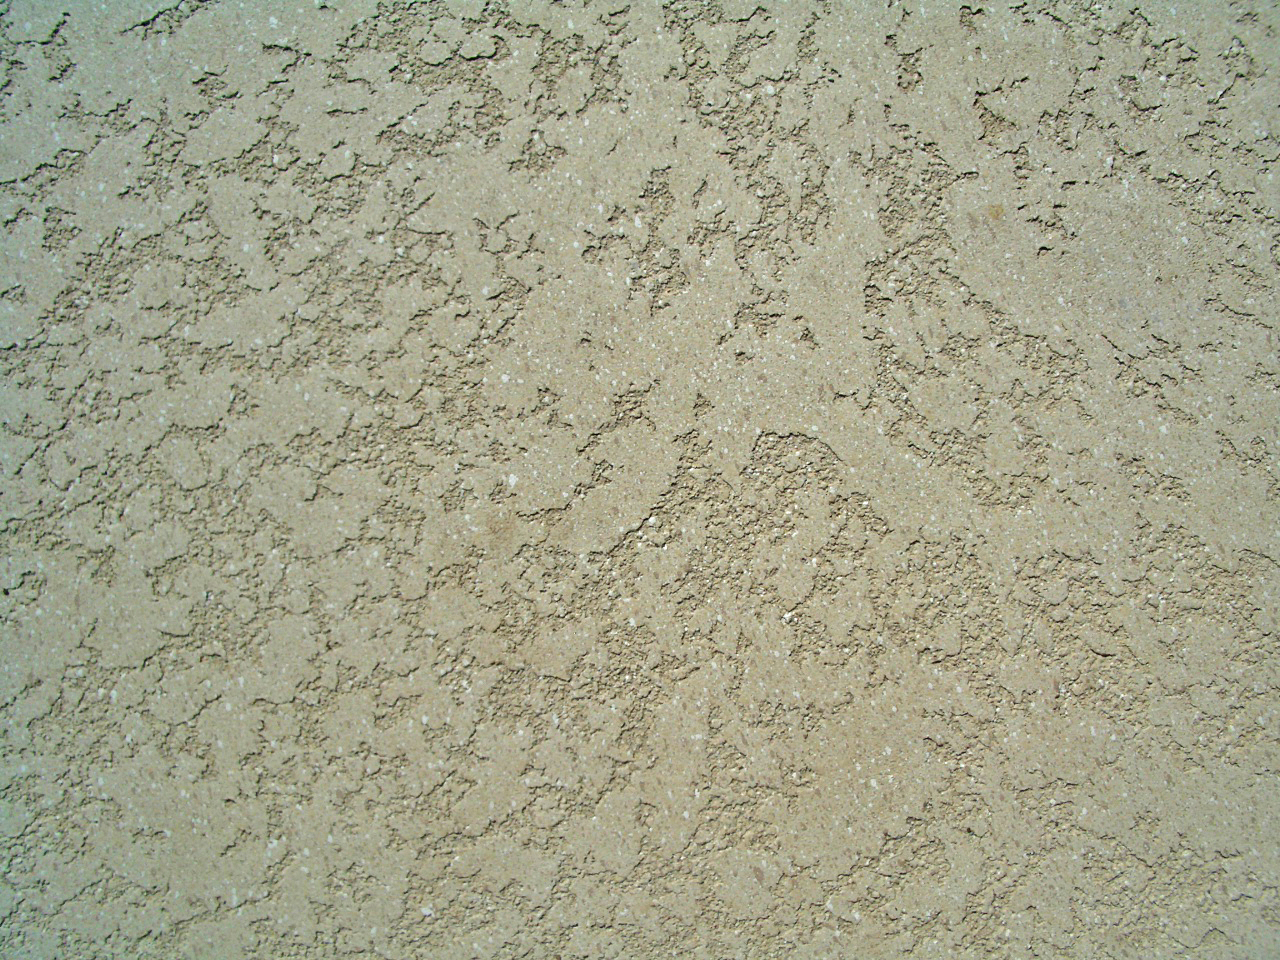 Concrete wall texture download free textures